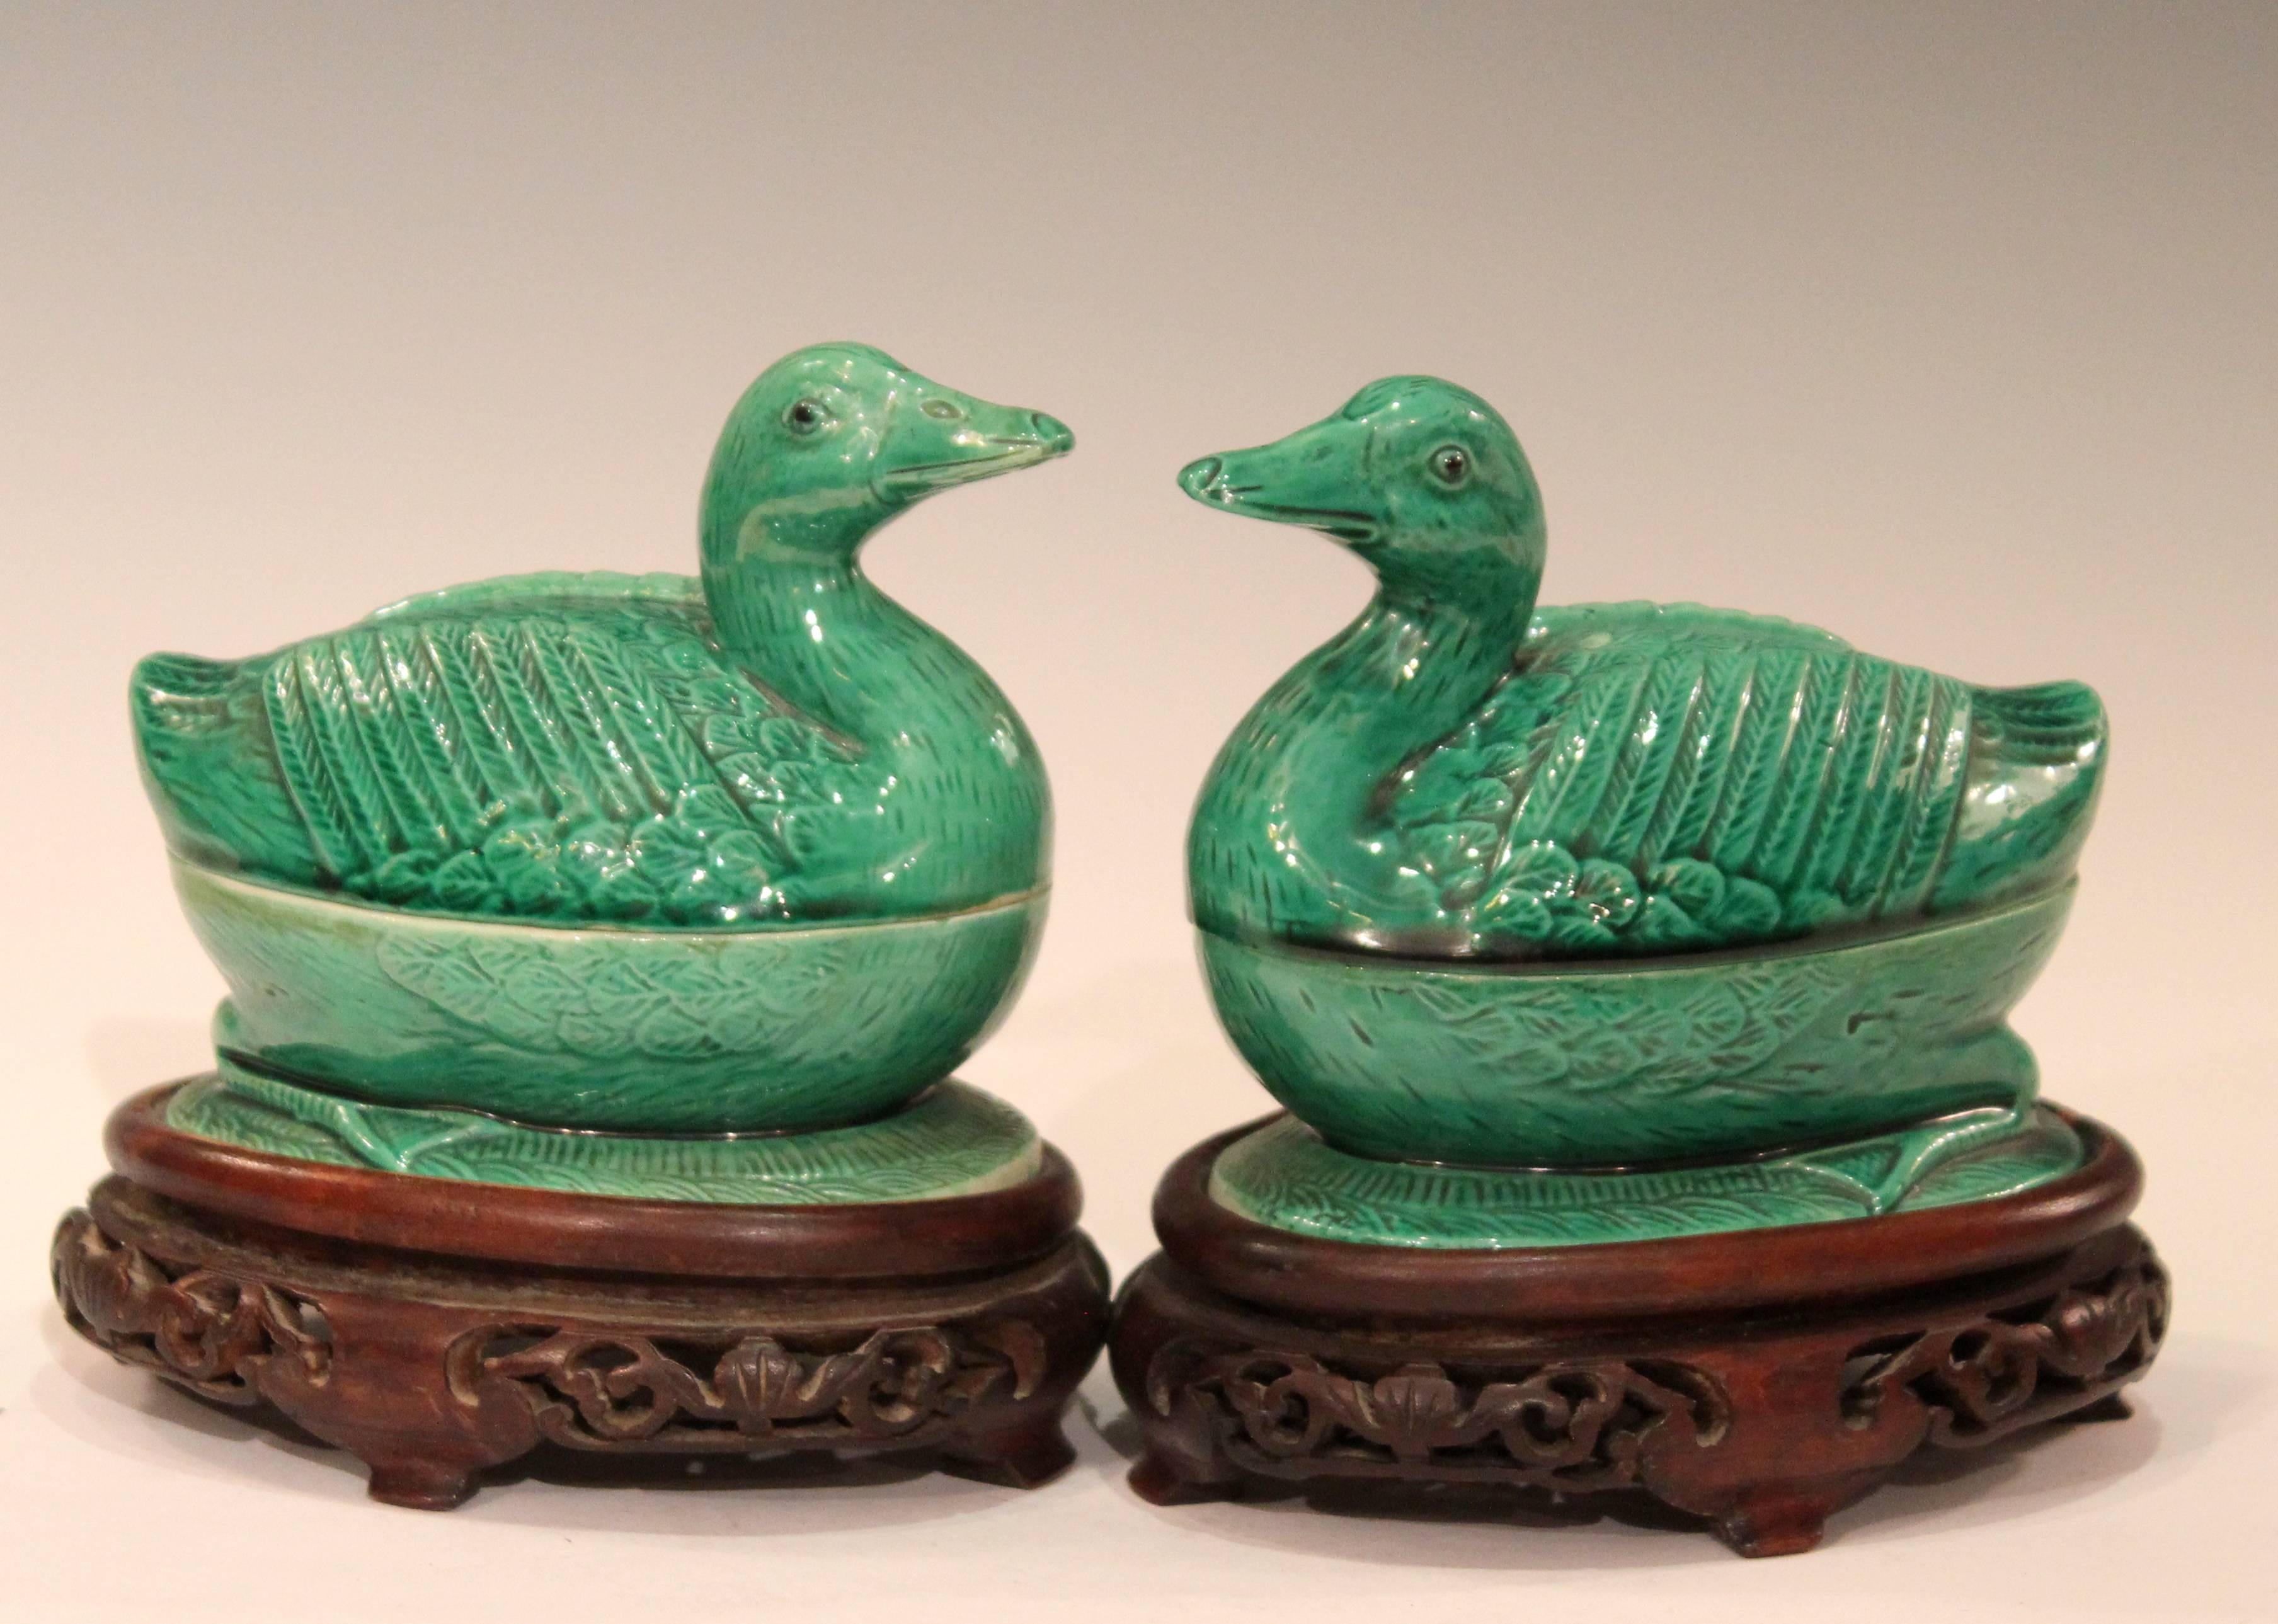 Pair of old Chinese porcelain duck figure boxes on custom stands, circa early 20th century, Republican period. True pair with heads tilted in opposite directions and expertly rendered with sharp detail and great green crackle glaze. Measure: 5"